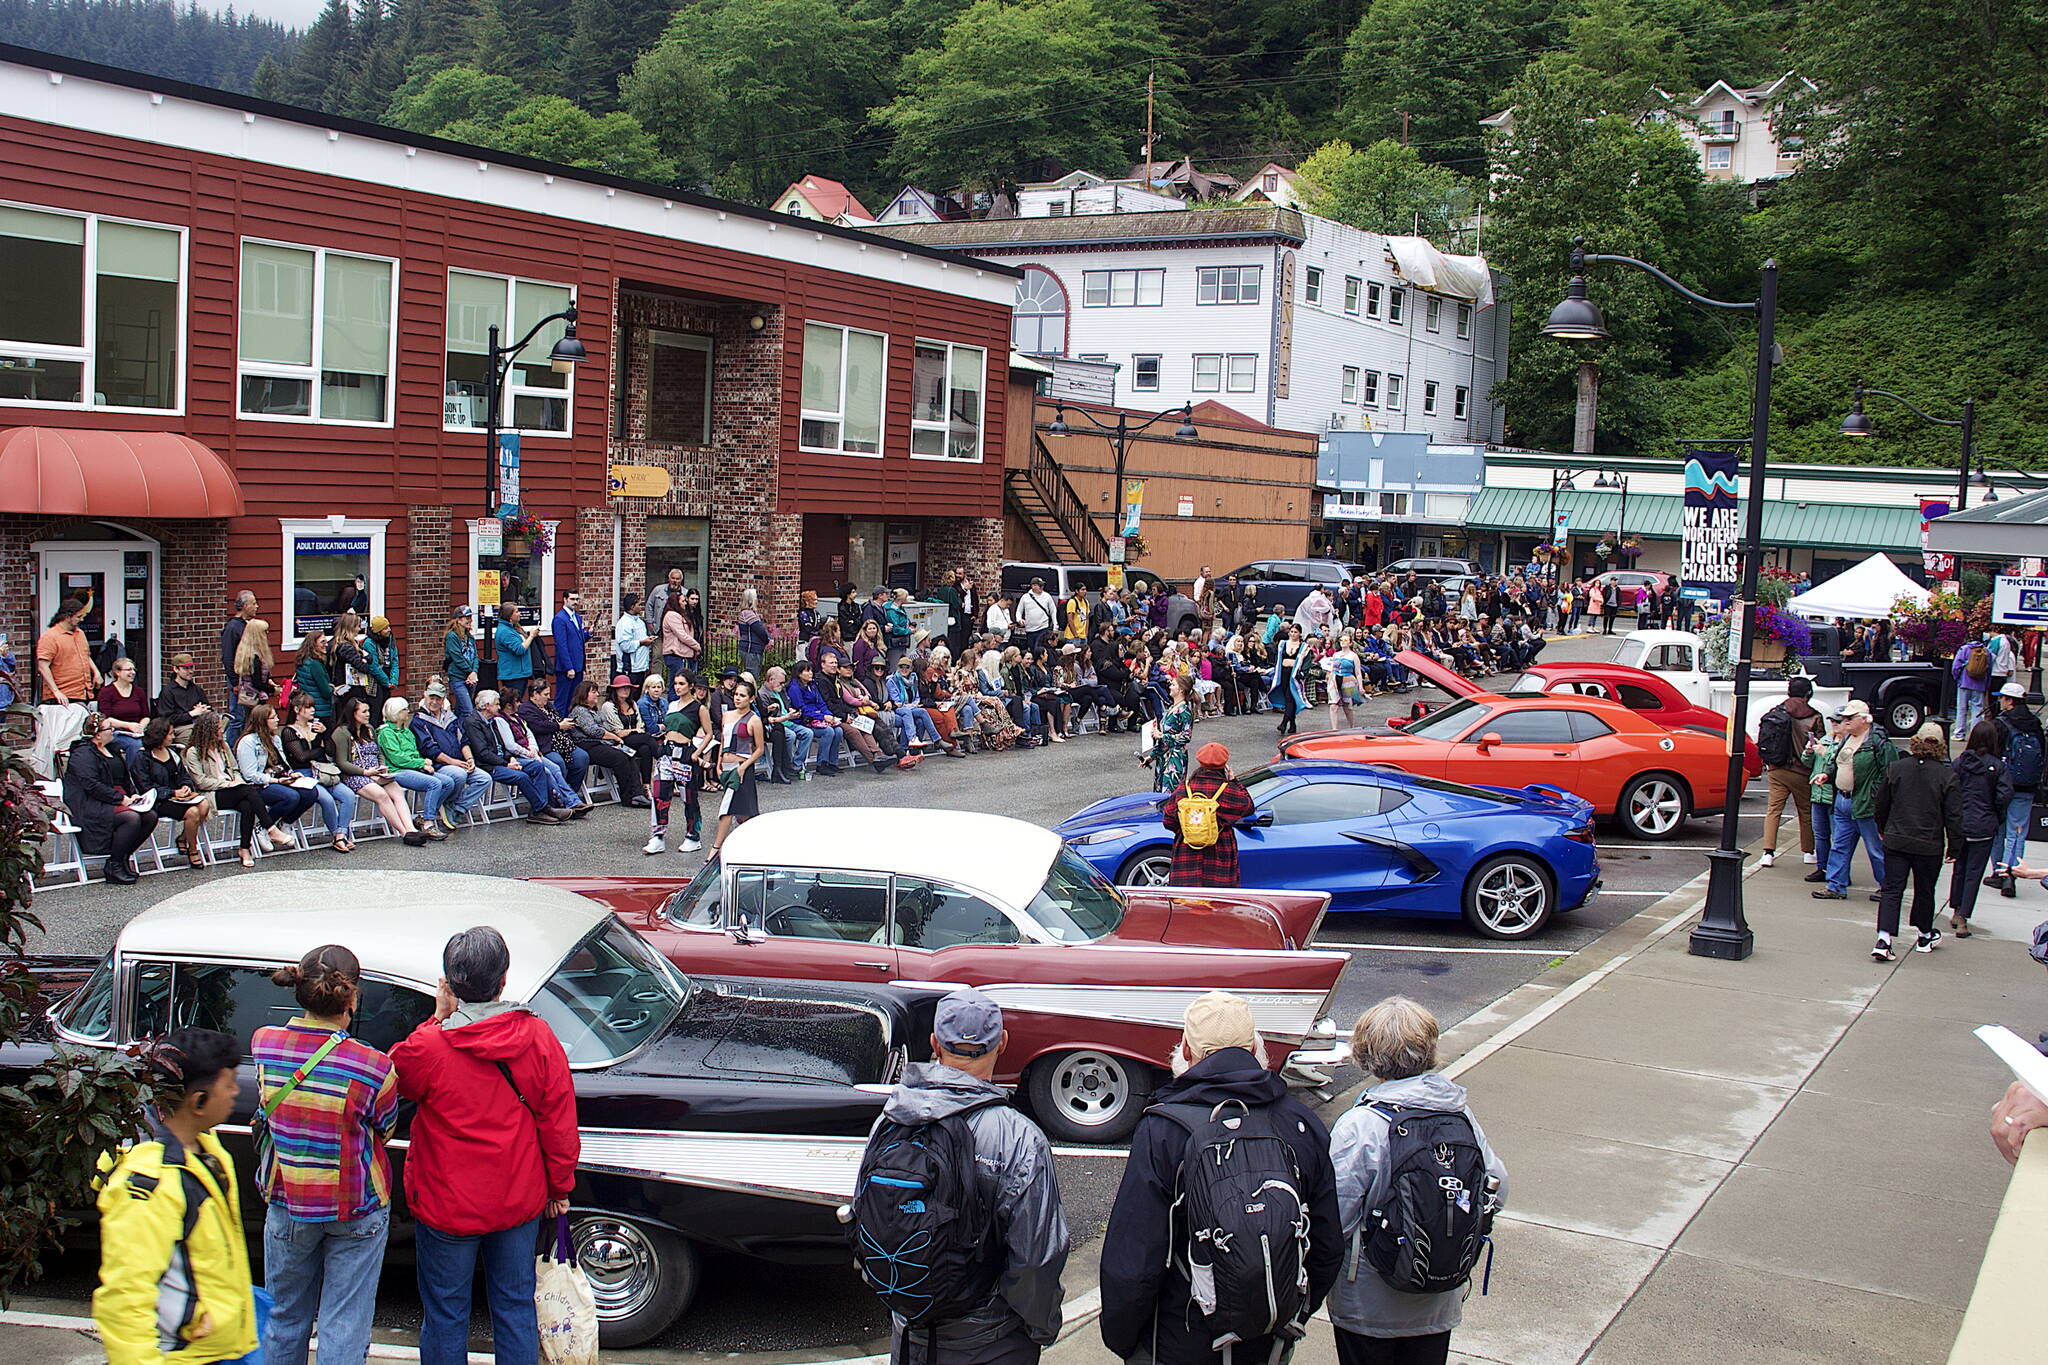 More than 100 residents, tourists and other observers line Ferry Way to watch Alaska Fashion Week’s outdoor runway show in downtown Juneau on Saturday. (Mark Sabbatini / Juneau Empire)